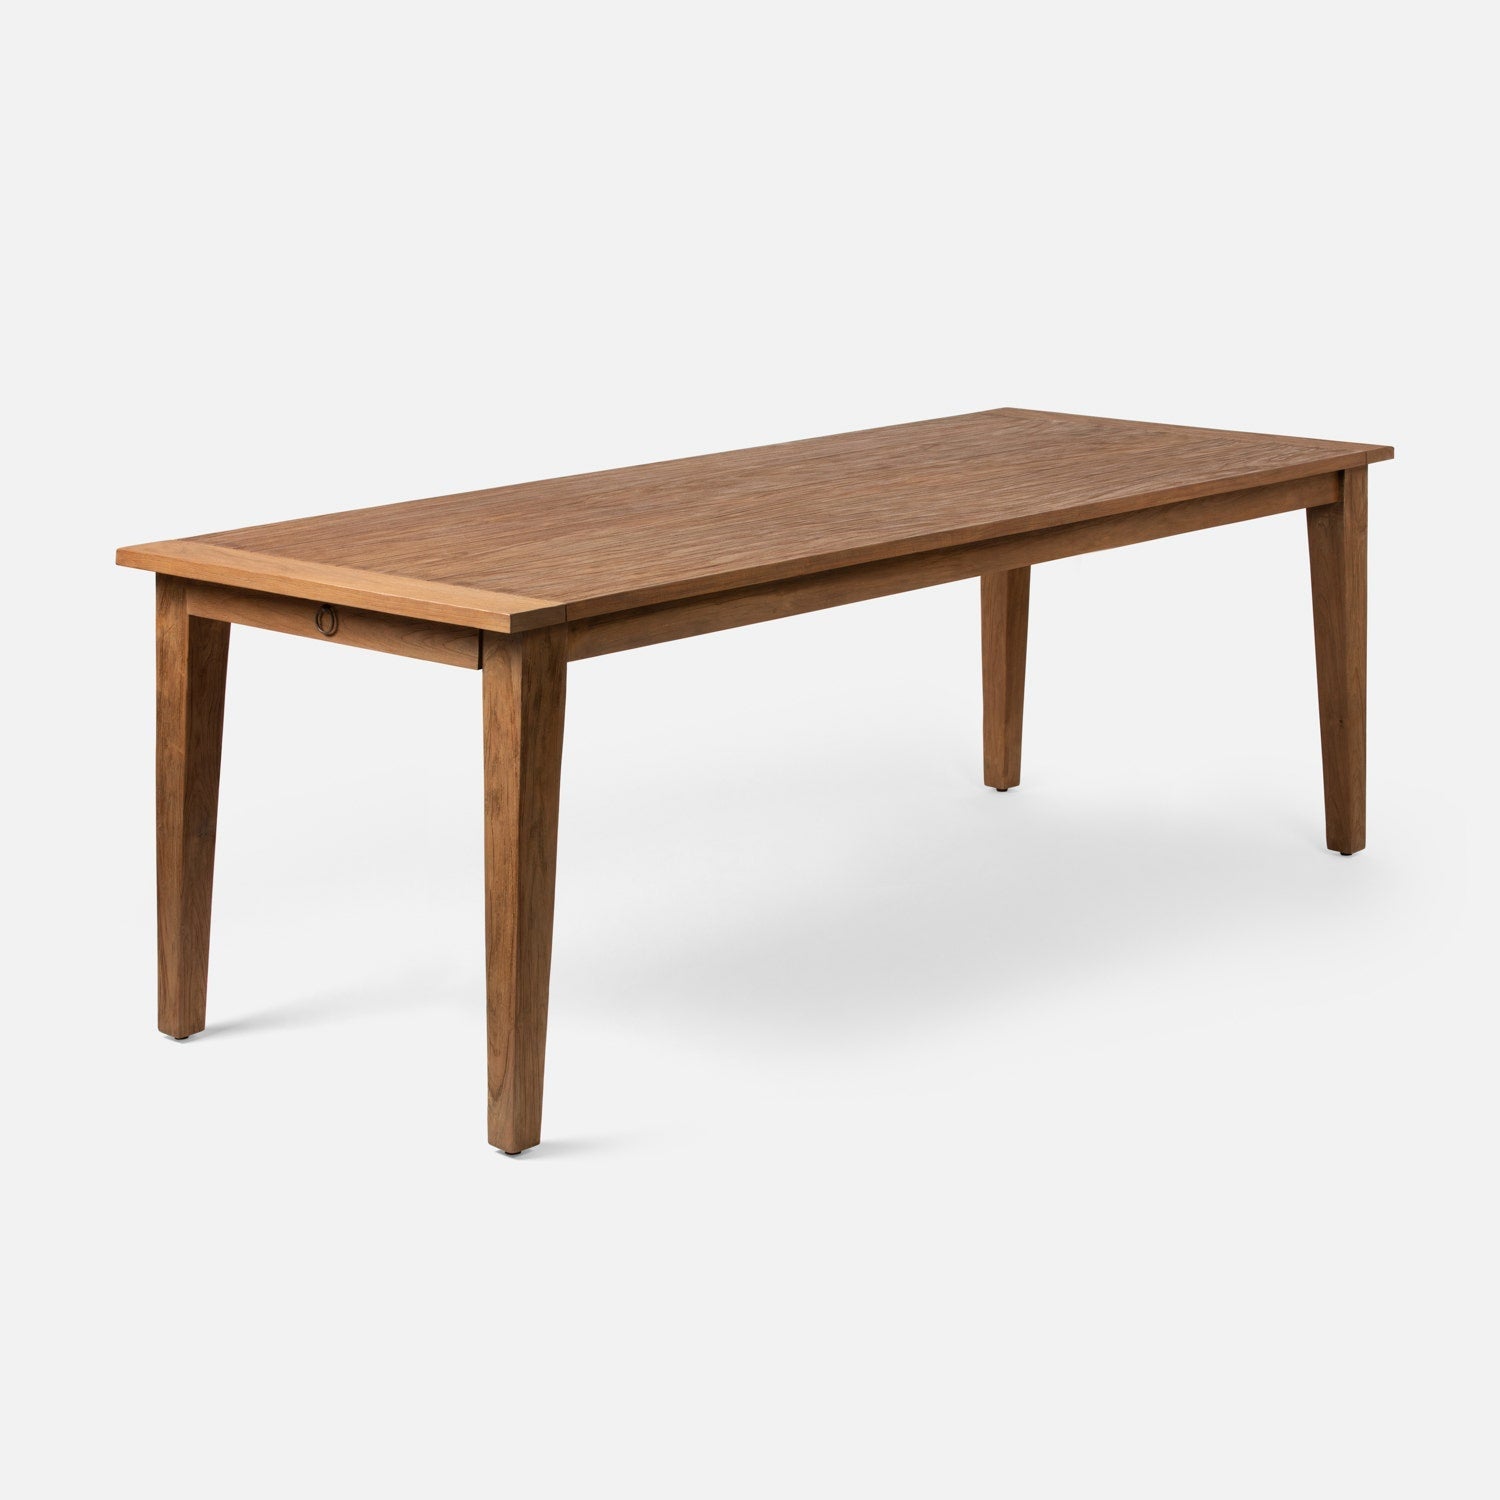 Made Goods Maisie 72" x 32" x 30" Rustic Teak Dinning Table With Rectangle Table Top